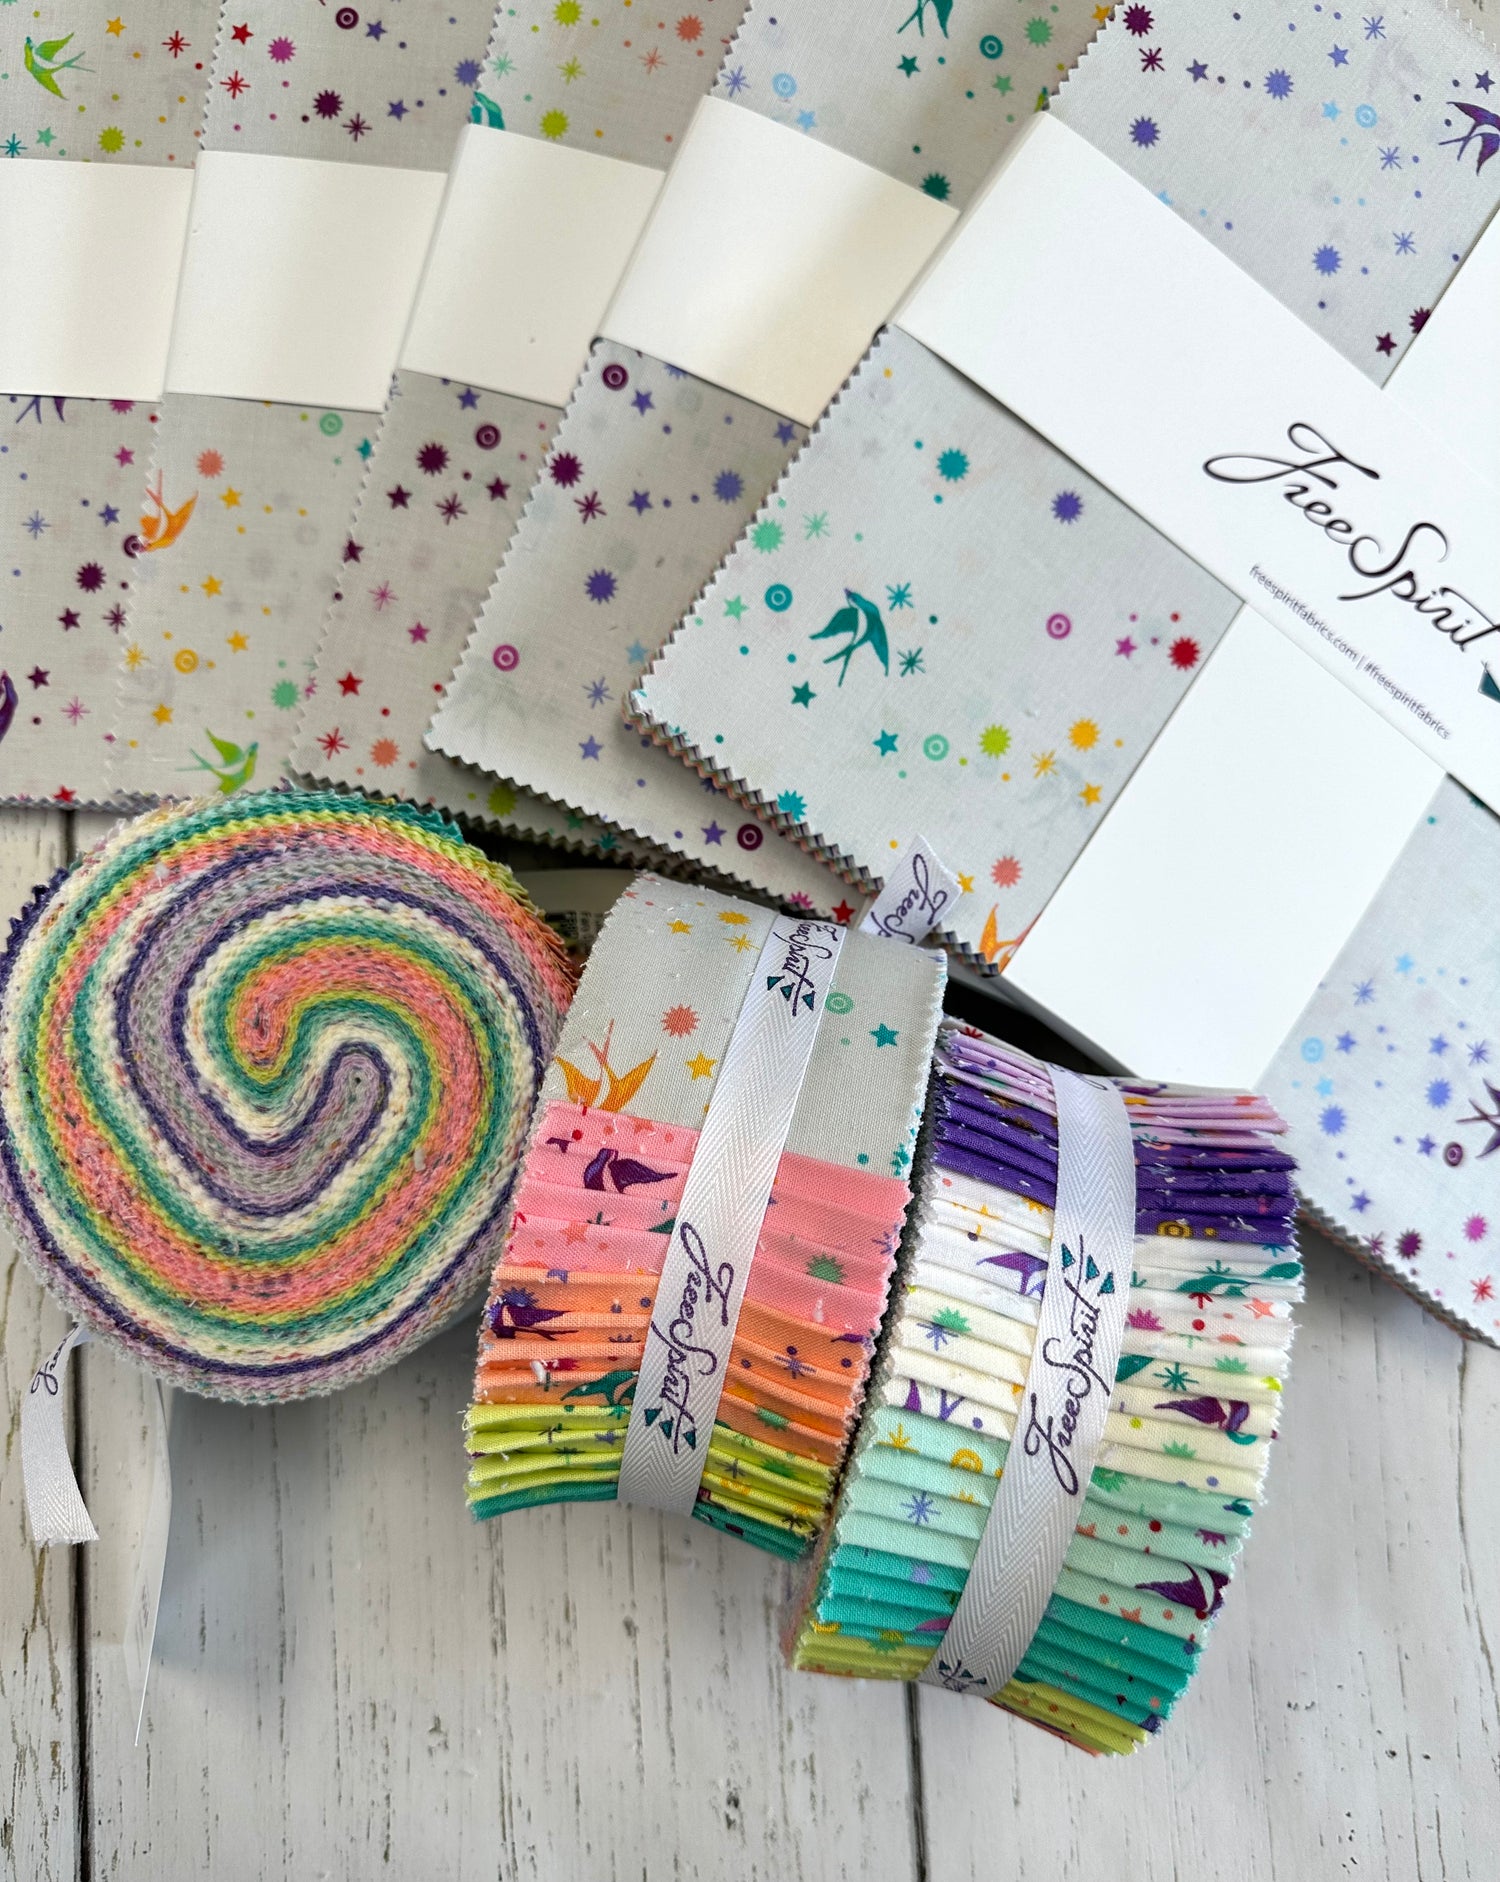 Free Fabric Swatches up to 10 Colors